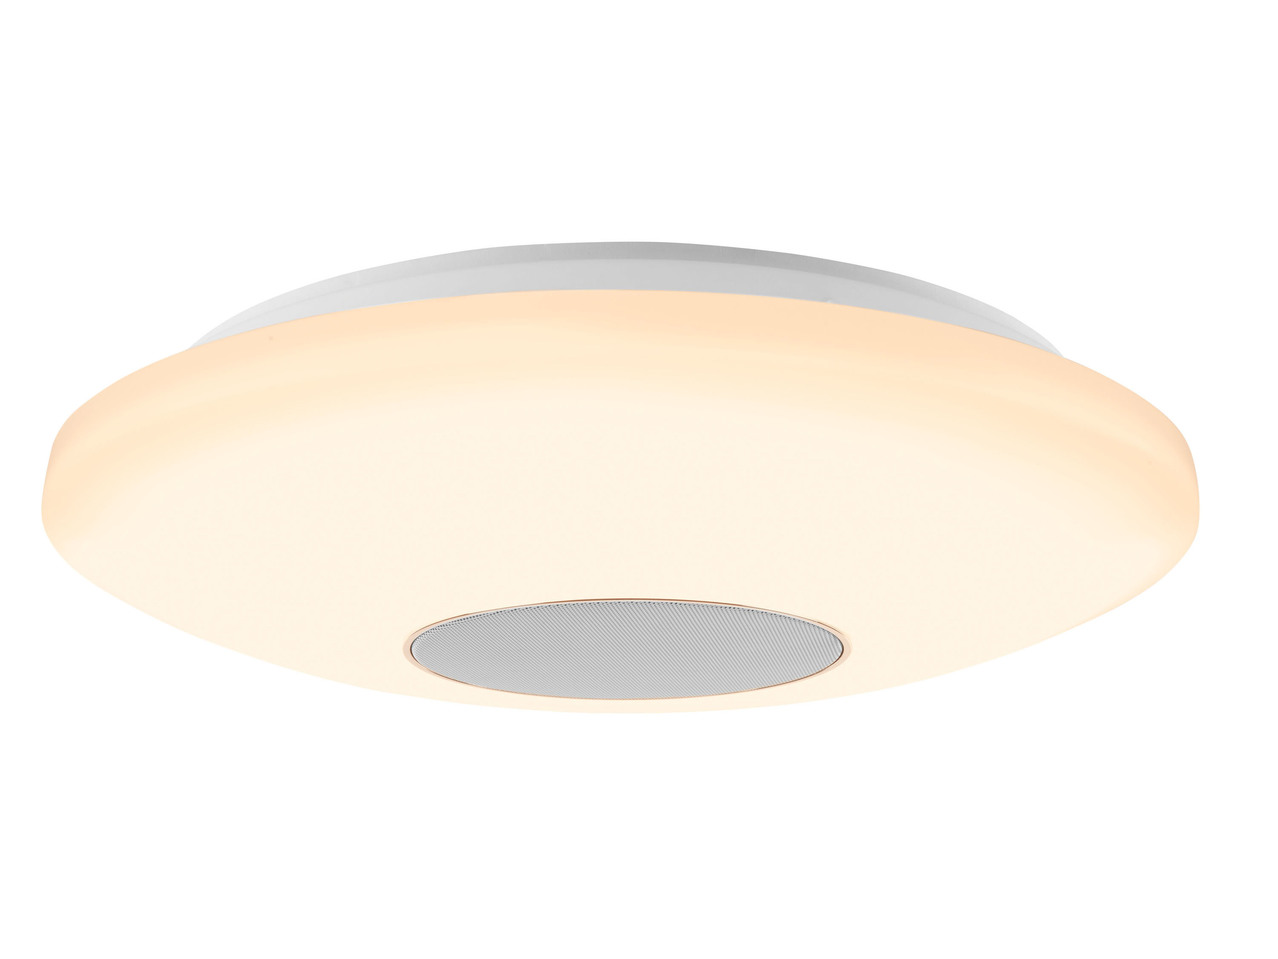 LED Ceiling Light with Bluetooth Speaker